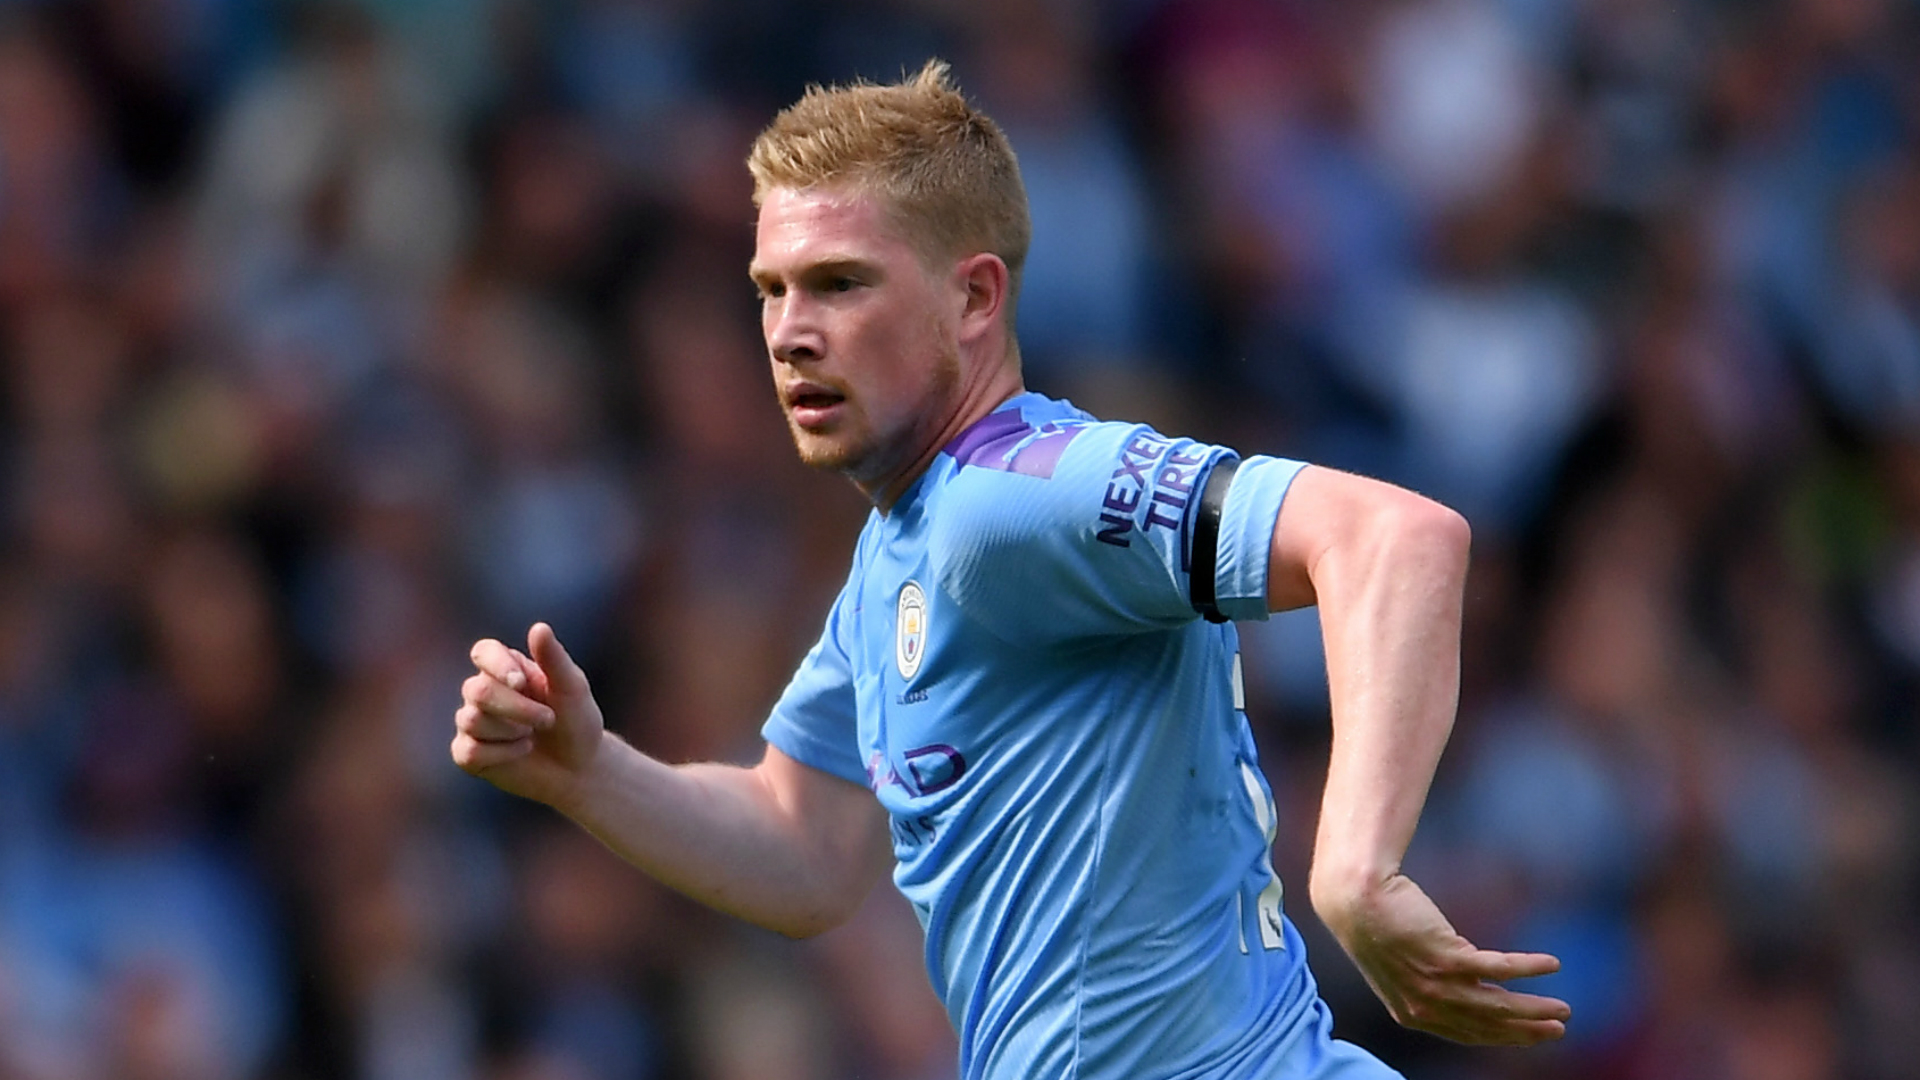 Kevin De Bruyne shredded Watford with a playmaking masterclass, so Pep Guardiola scratches his head when the Belgian makes a simple mistake.